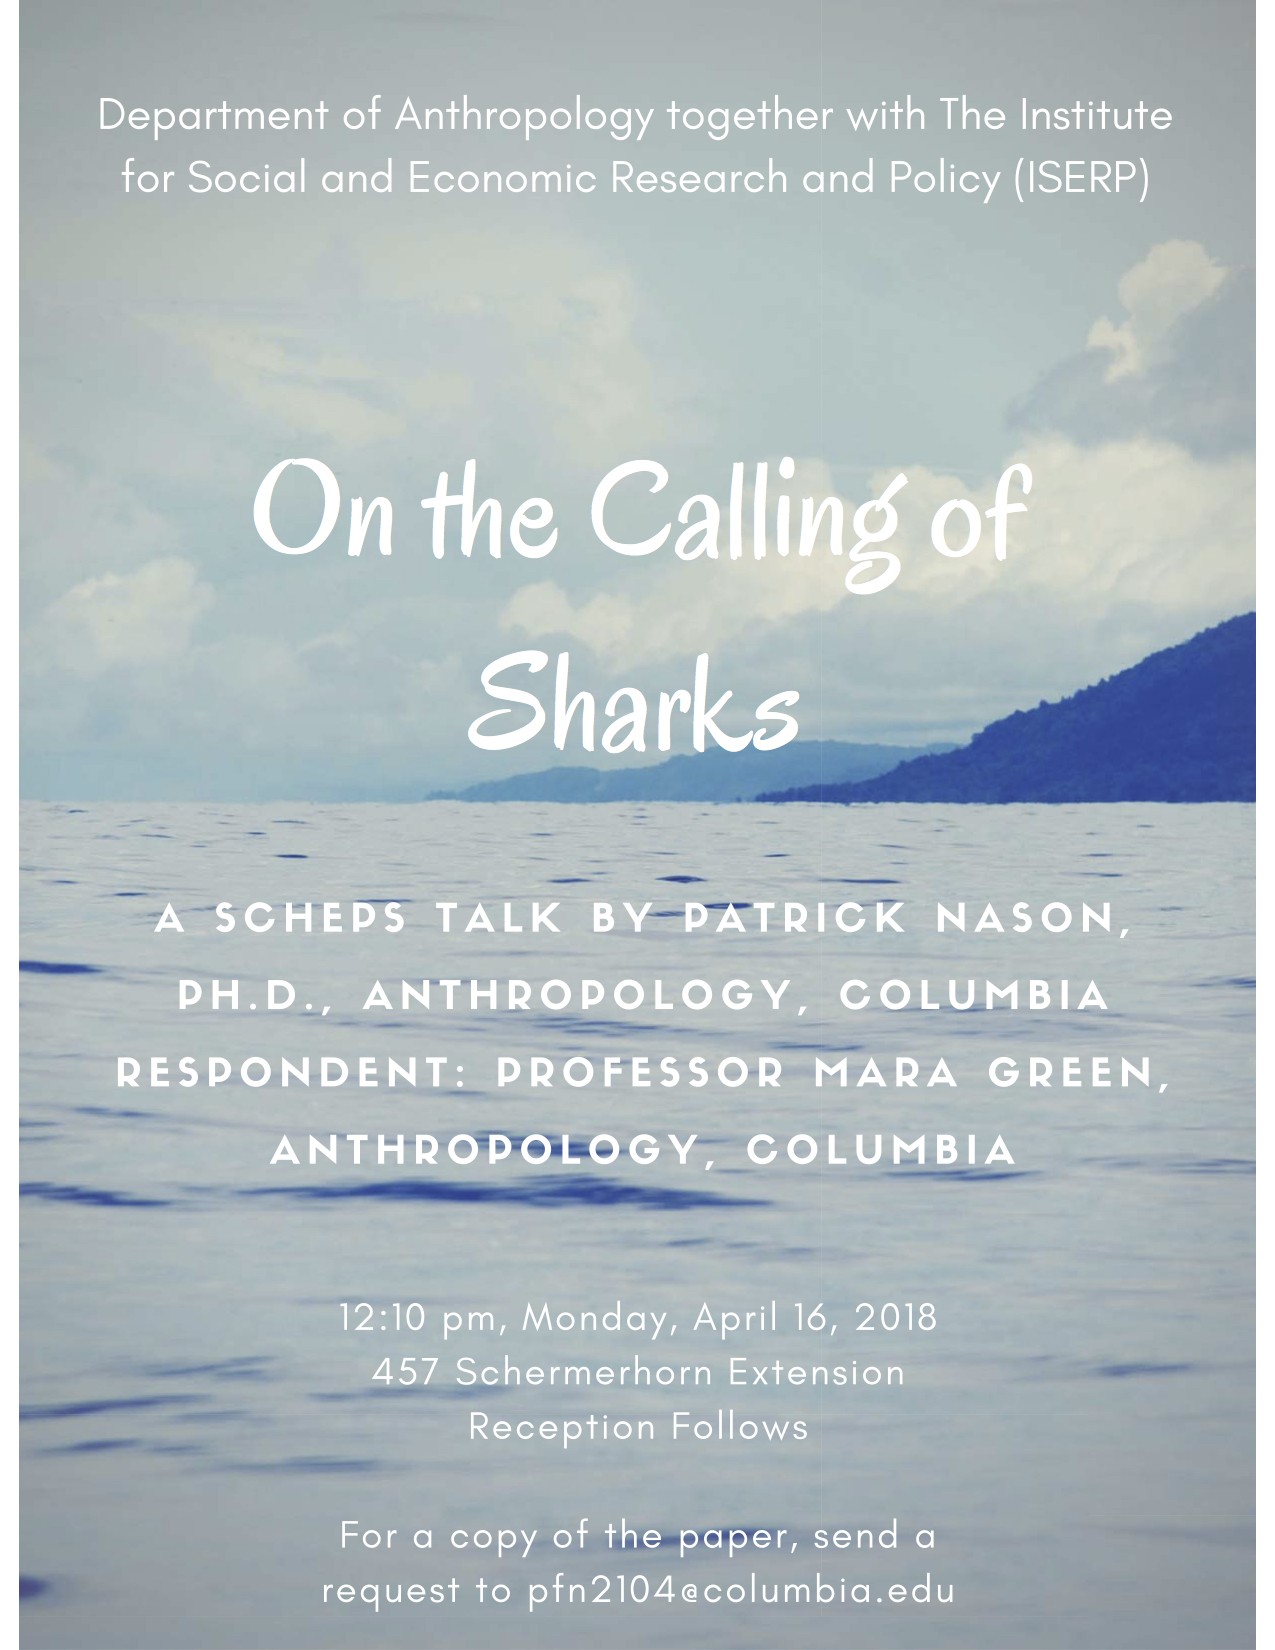 Event Poster for Patrick Nason's "On the Calling of Sharks"